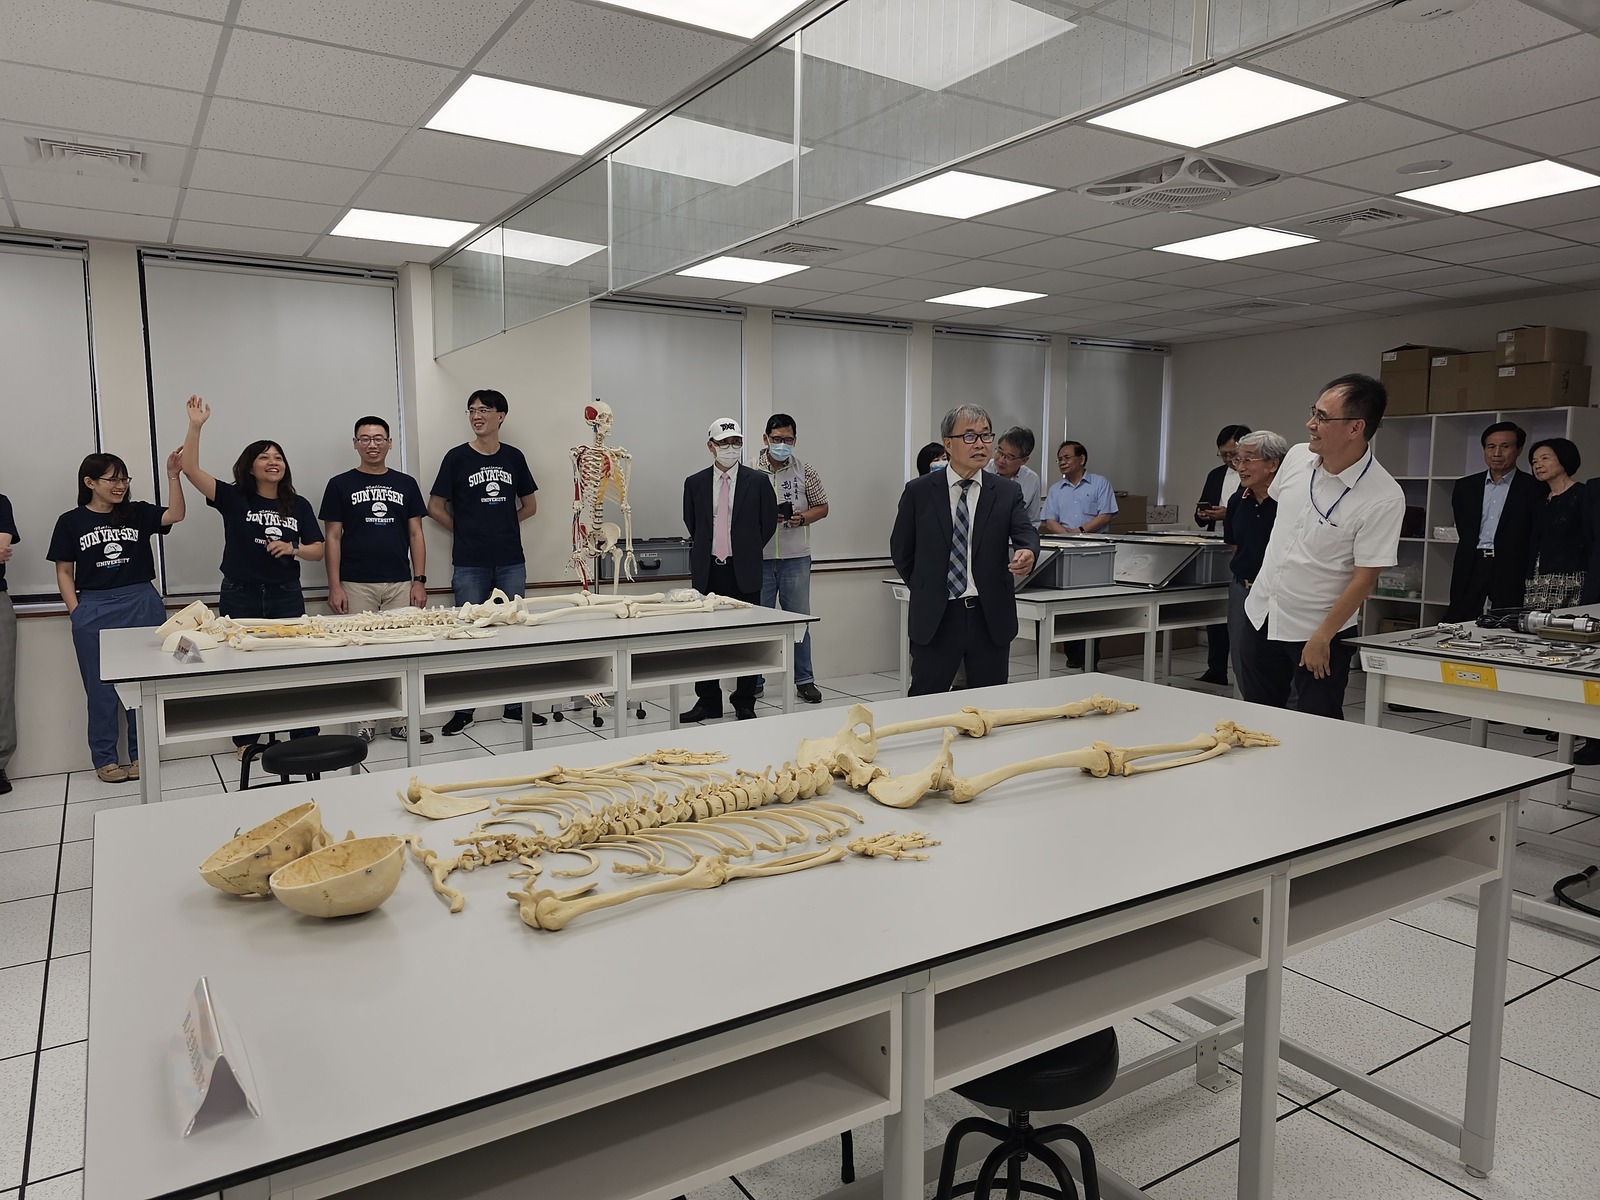 The NSYSU College of Medicine showcased the functionality of clinical skills training teaching props and manikins during the event.